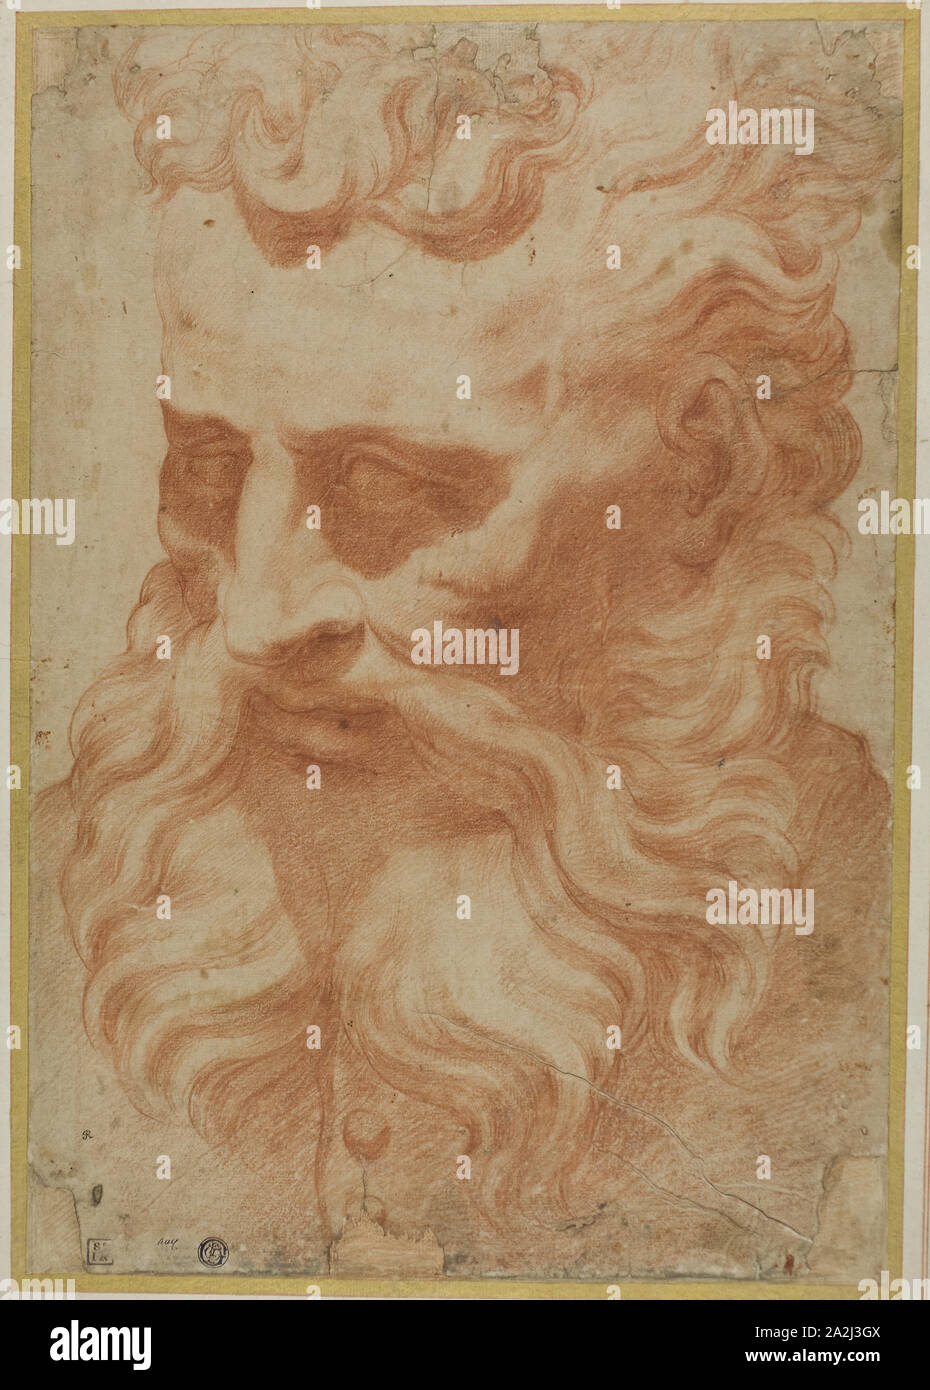 Head of God the Father, n.d., Attributed to Daniele Ricciarelli, called Daniele da Volterra, Italian, 1509-1566, Italy, Red chalk on ivory laid paper, laid down on board, 419 x 290 mm Stock Photo